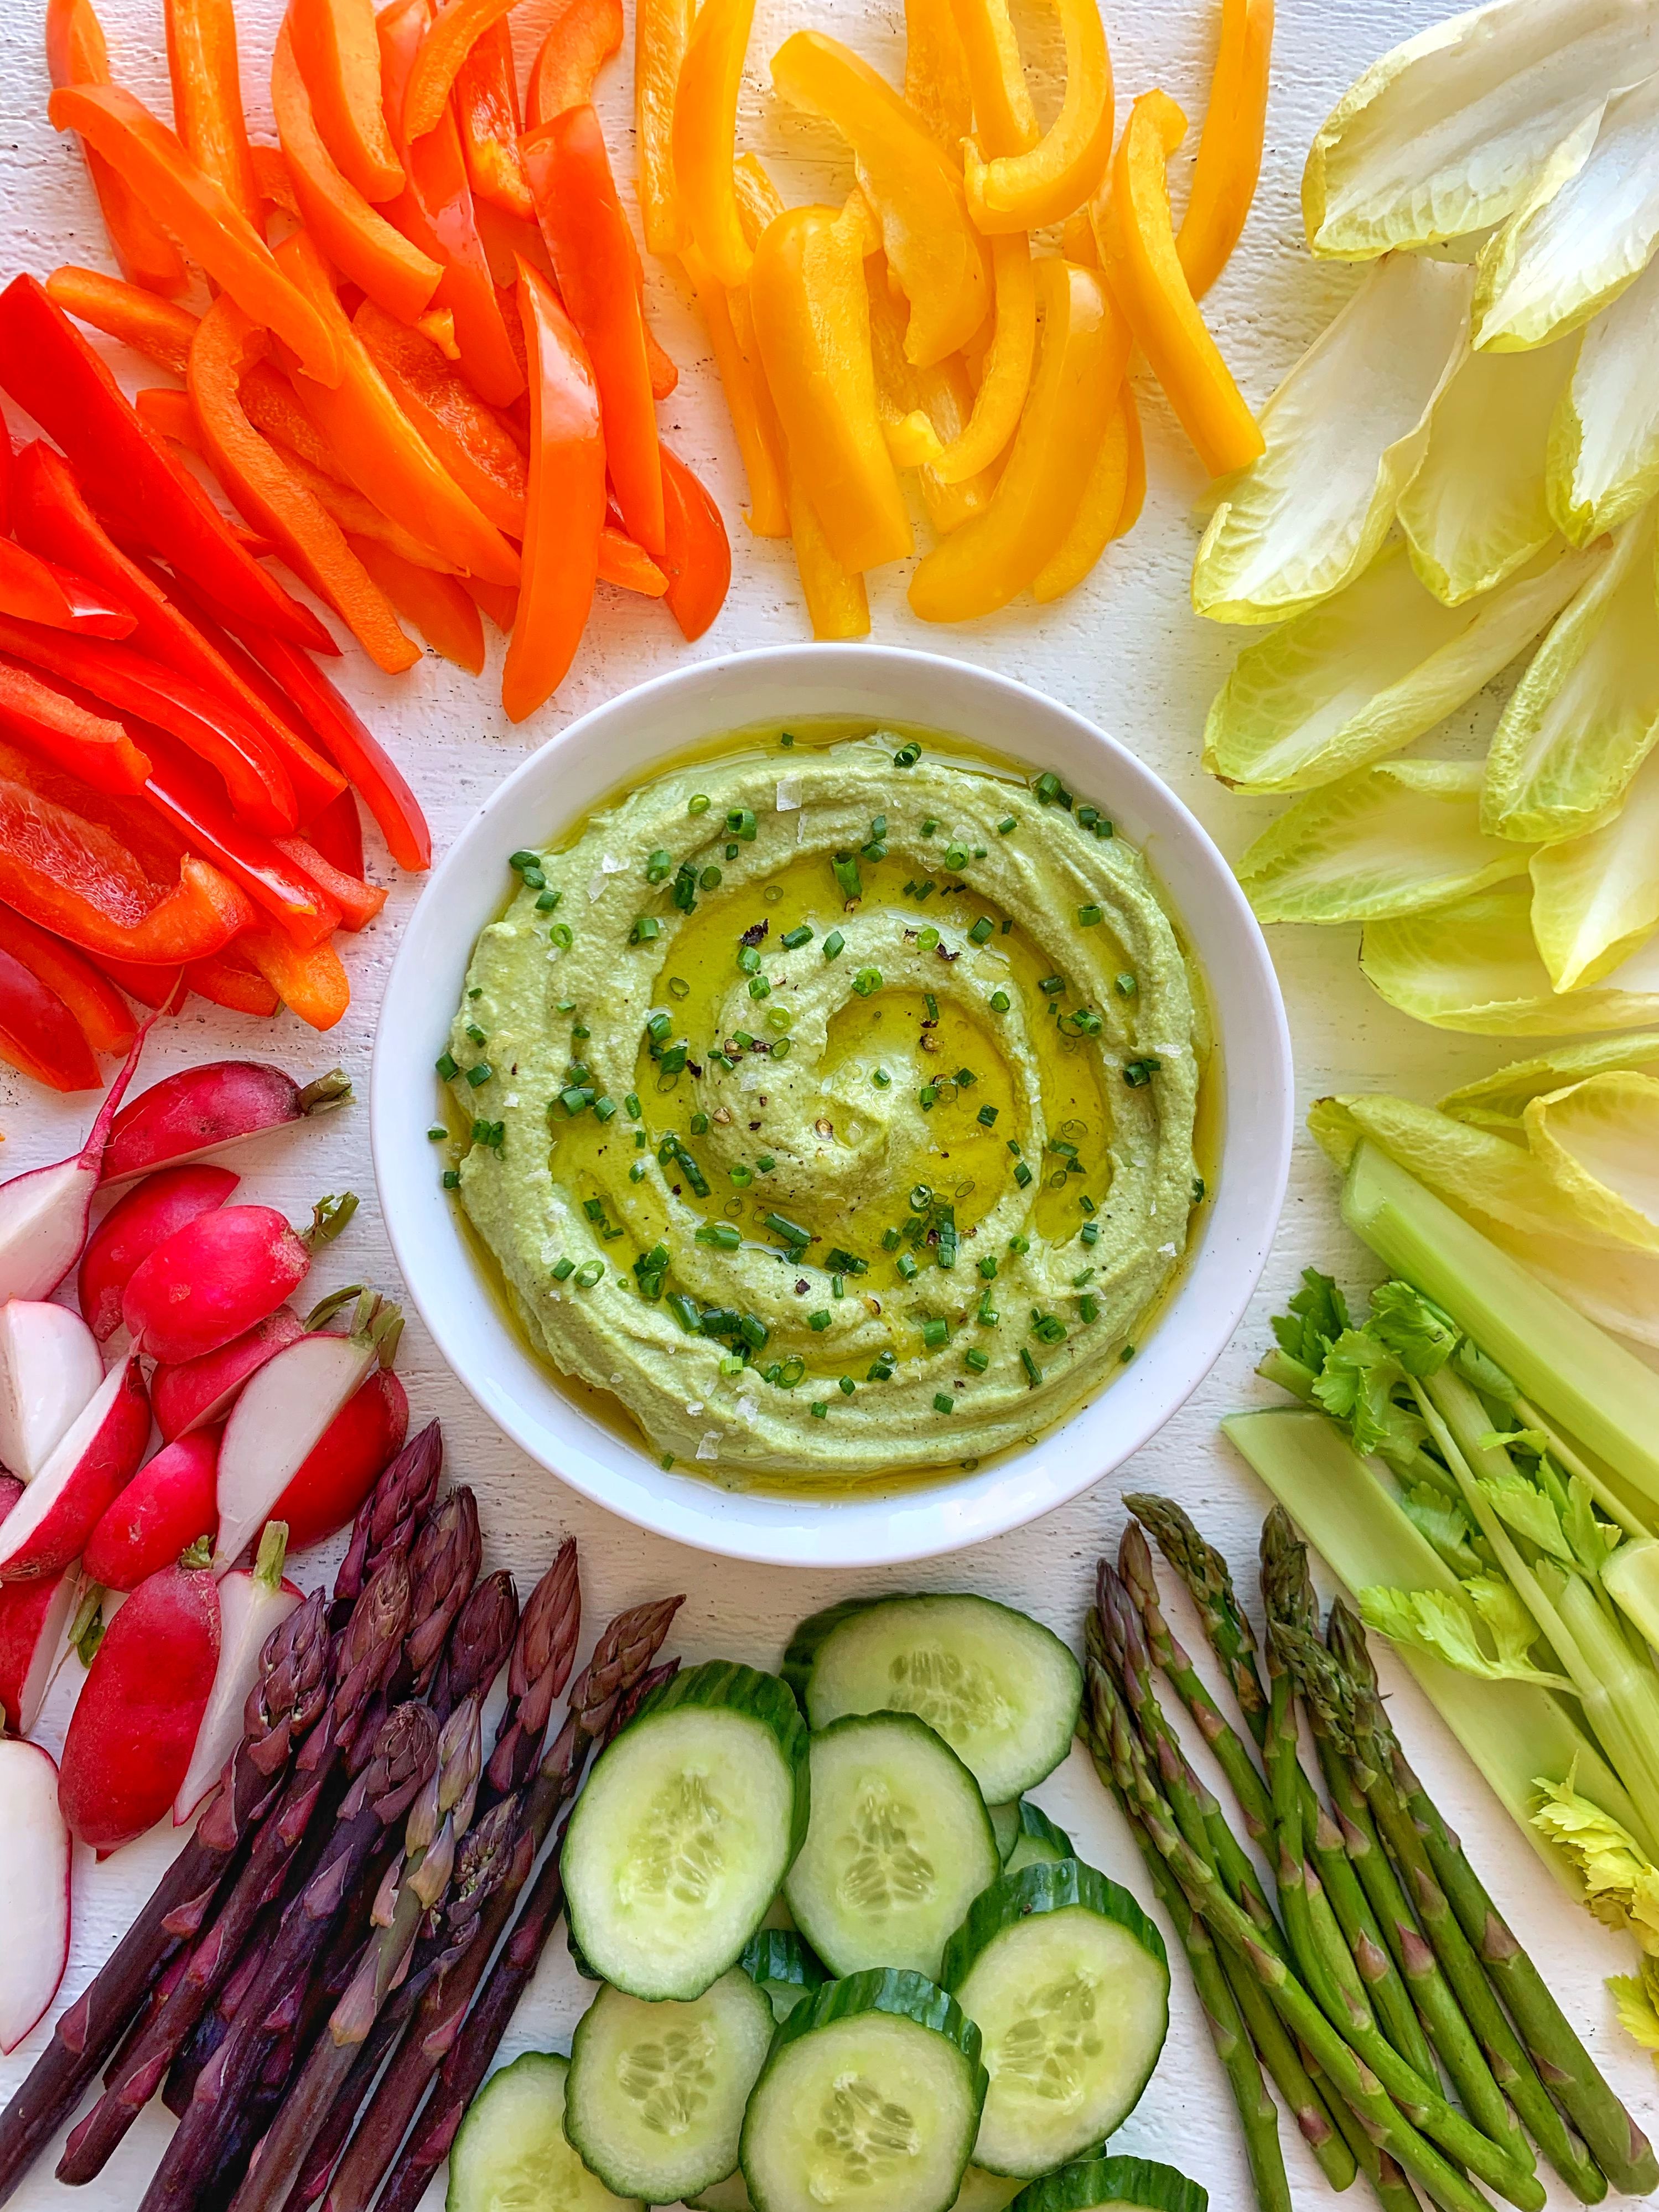 Whole30 Green Goddess Dip with Crudité by thefeedfeed | Quick & Easy ...